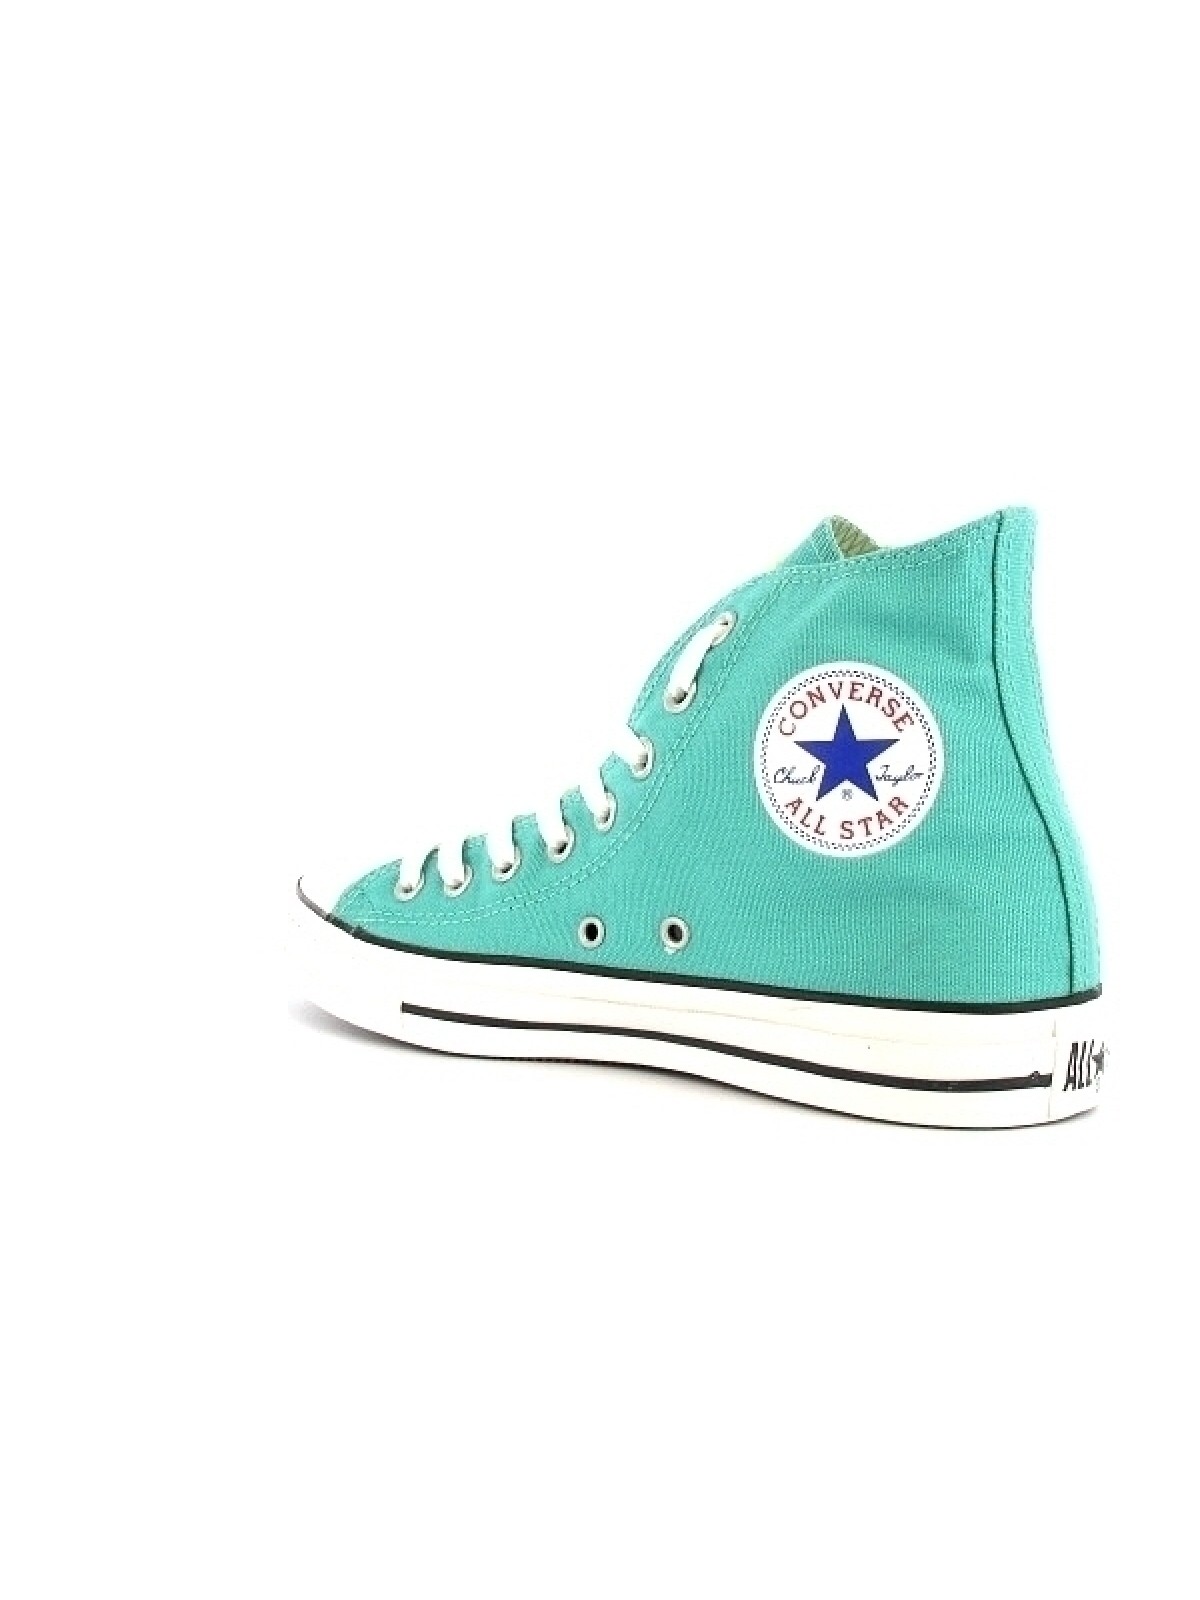 converse all star bleu turquoise basse